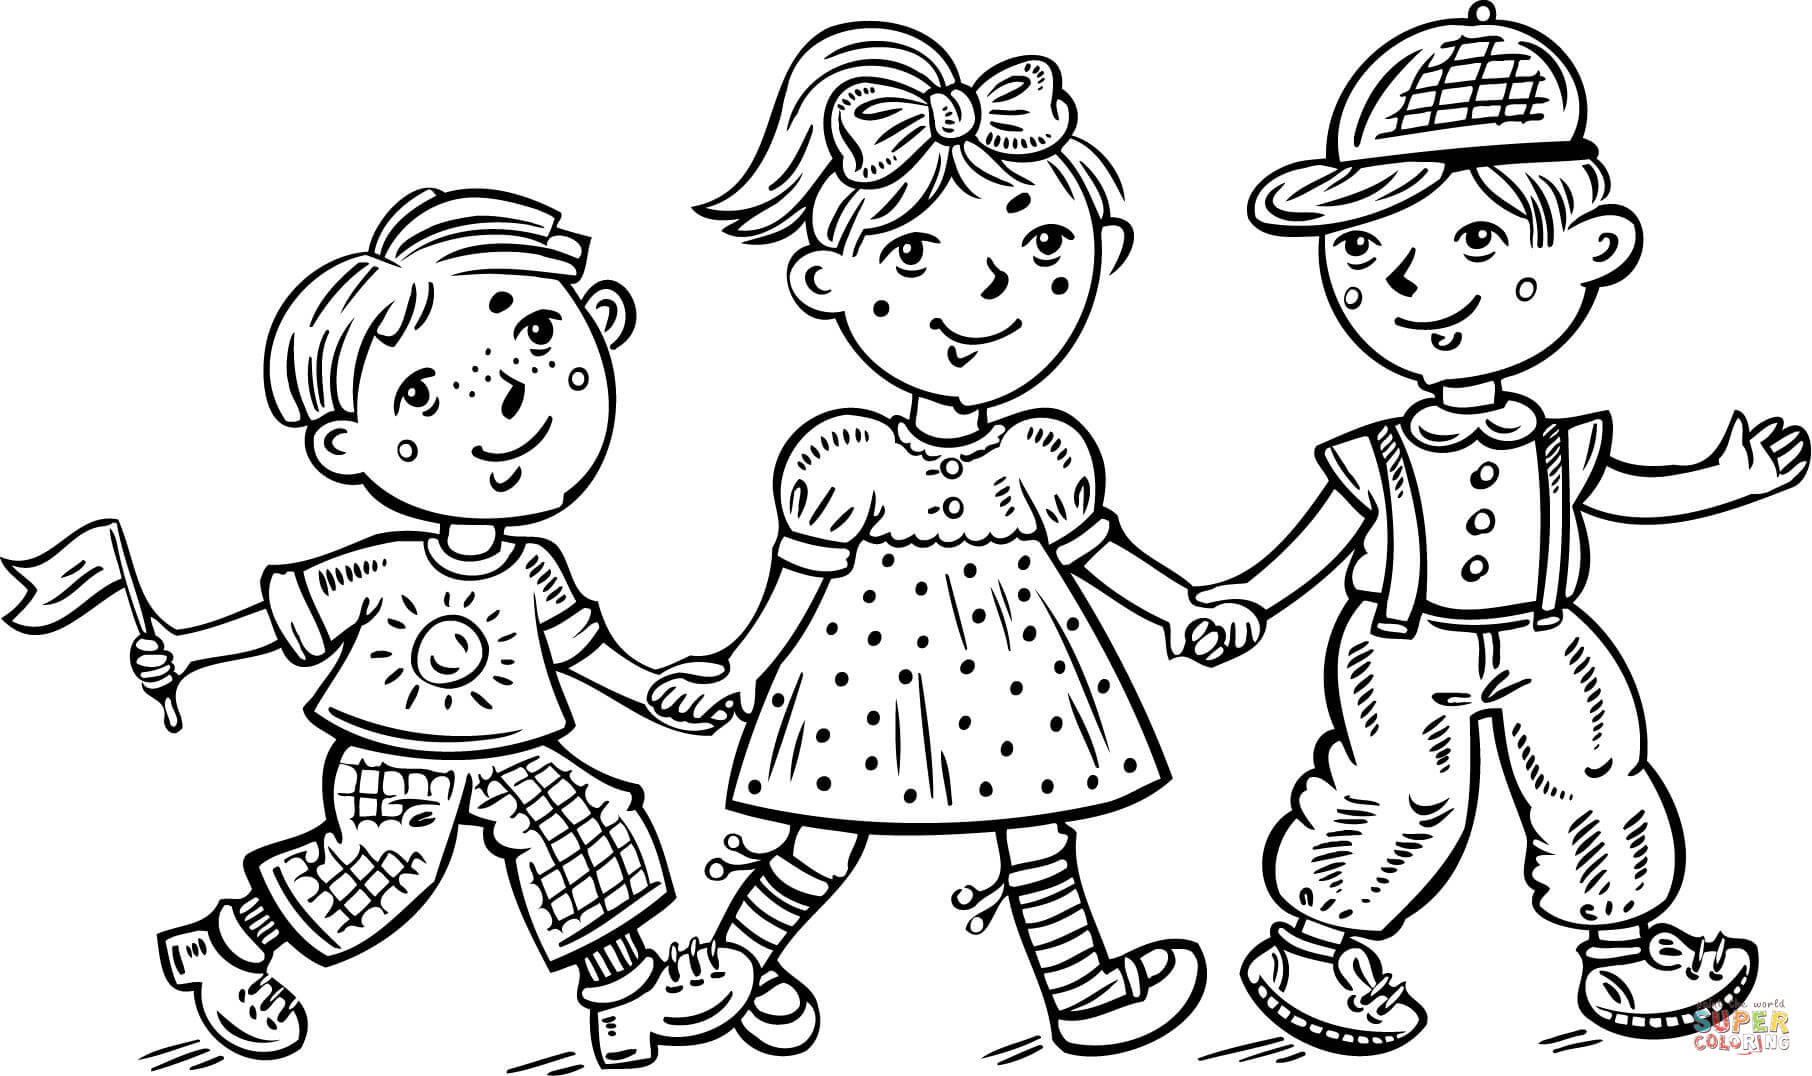 Coloring Pages Kidsboys.Com
 Children Boys and a Girl Celebrating coloring page